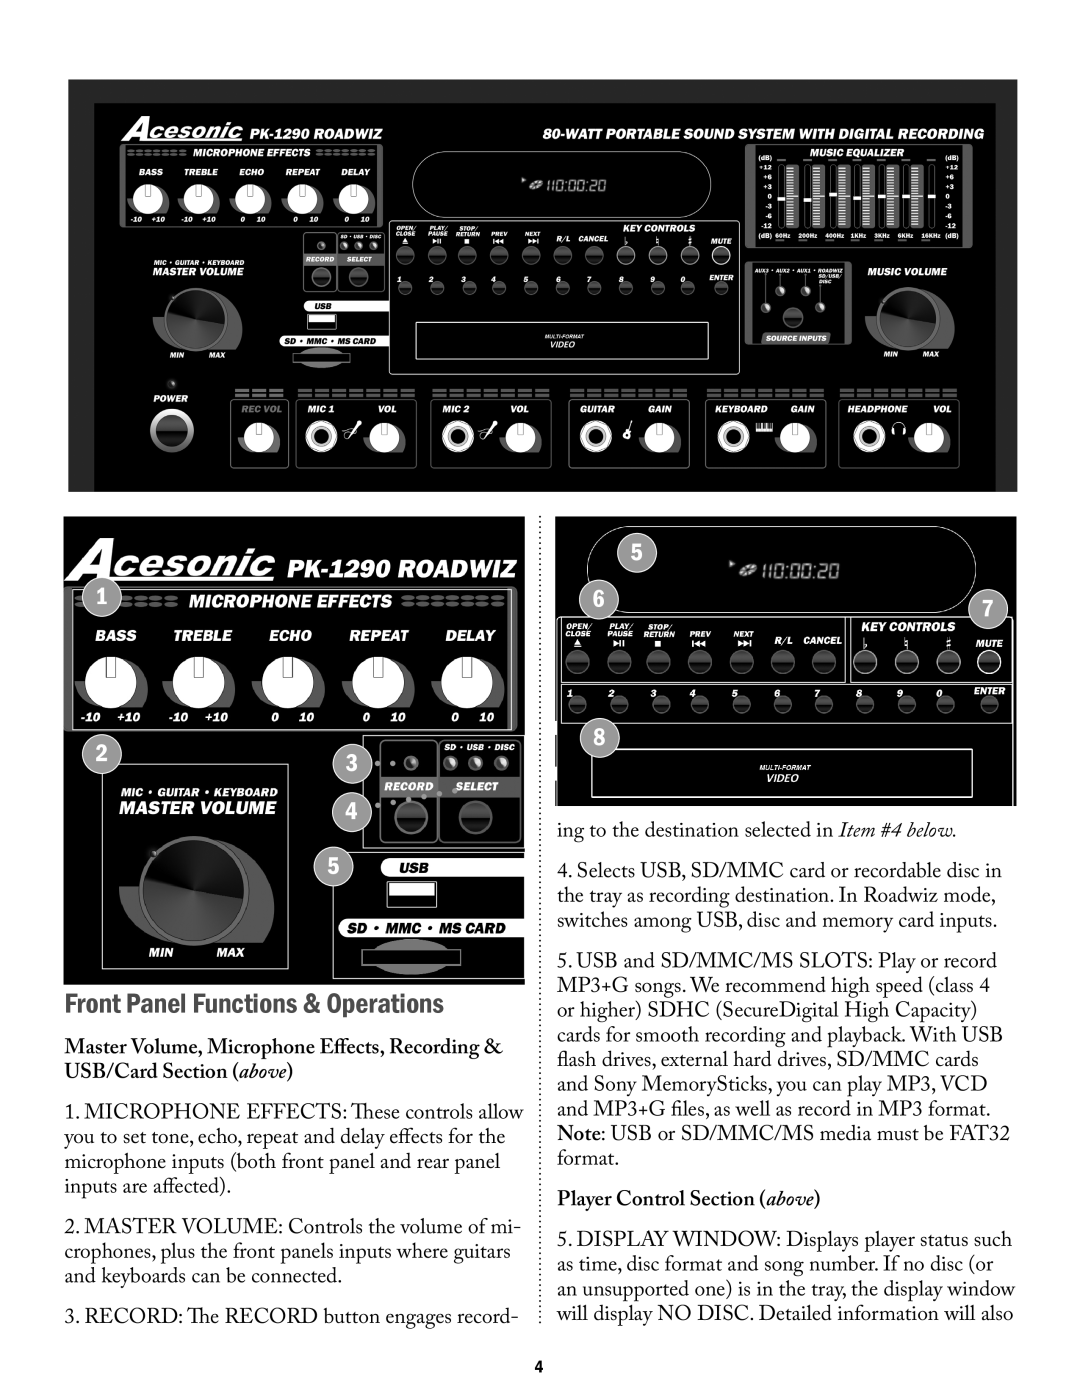 Acesonic PK-1290 user manual Front Panel Functions & Operations, Player Control Section above 